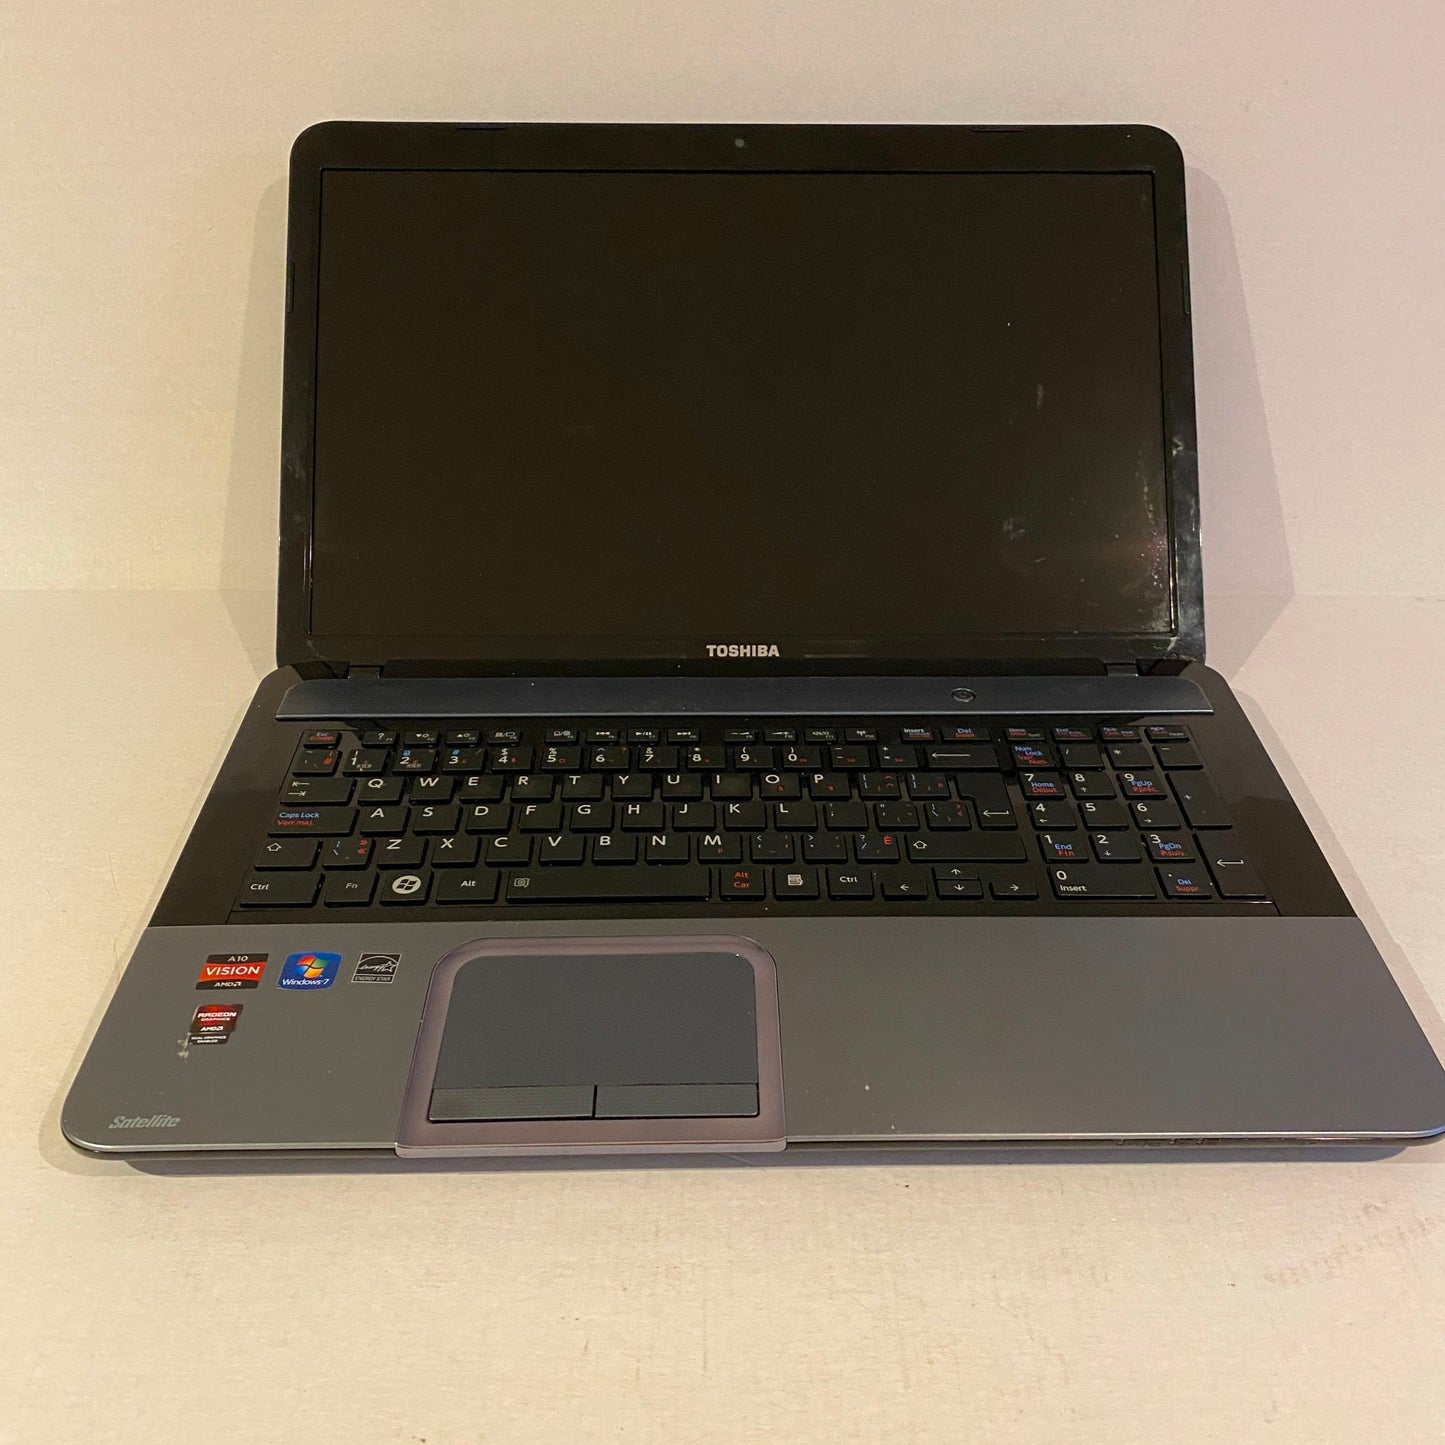 For Parts - Lot of 2 Laptops Acer Aspire 5535, Toshiba Satellite